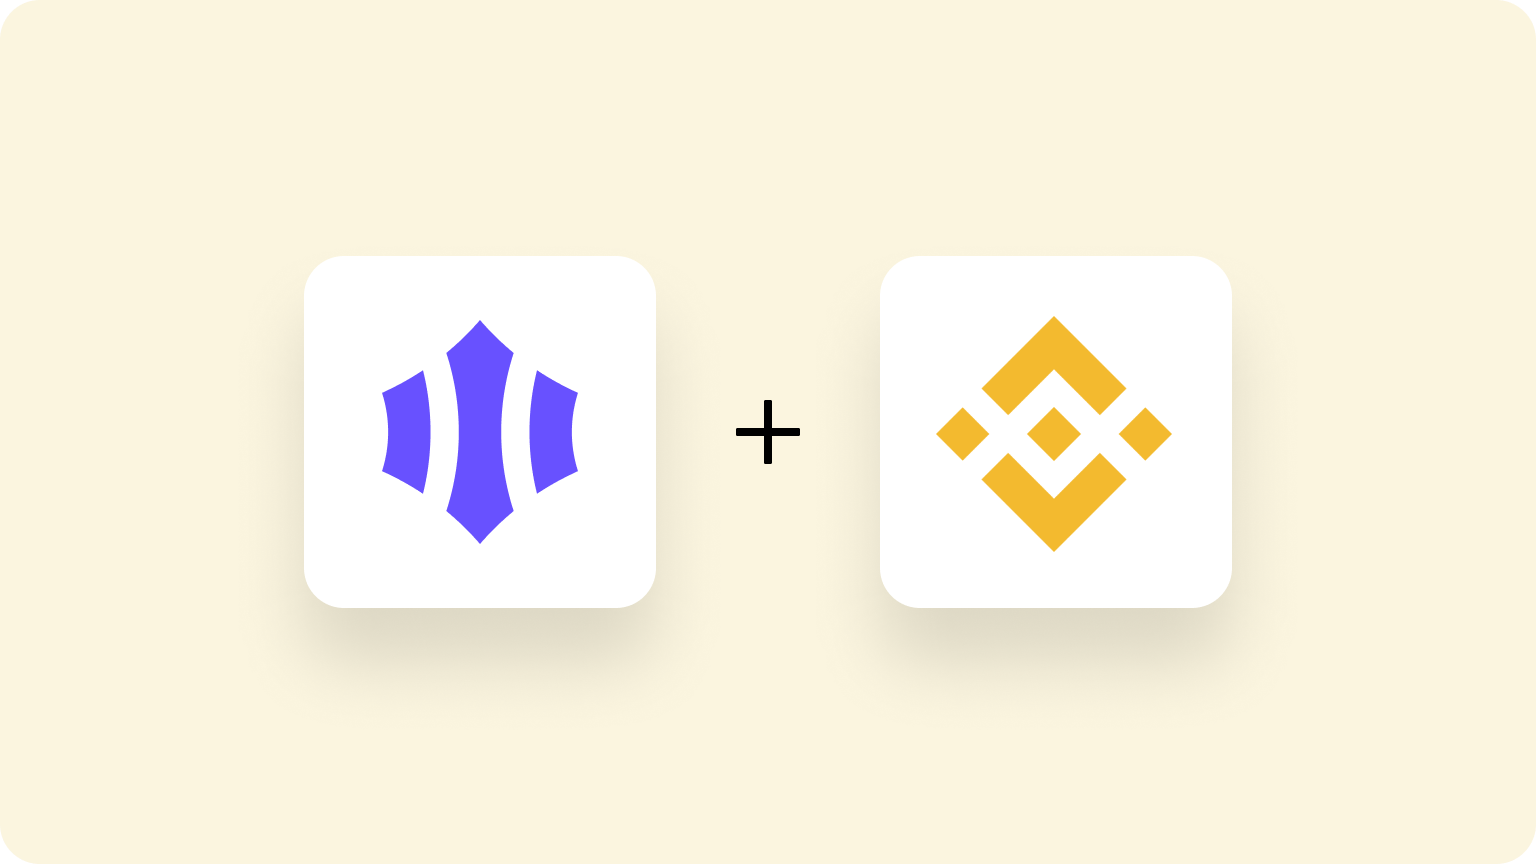 Build User-Friendly DApps With Binance Smart Chain in Minutes